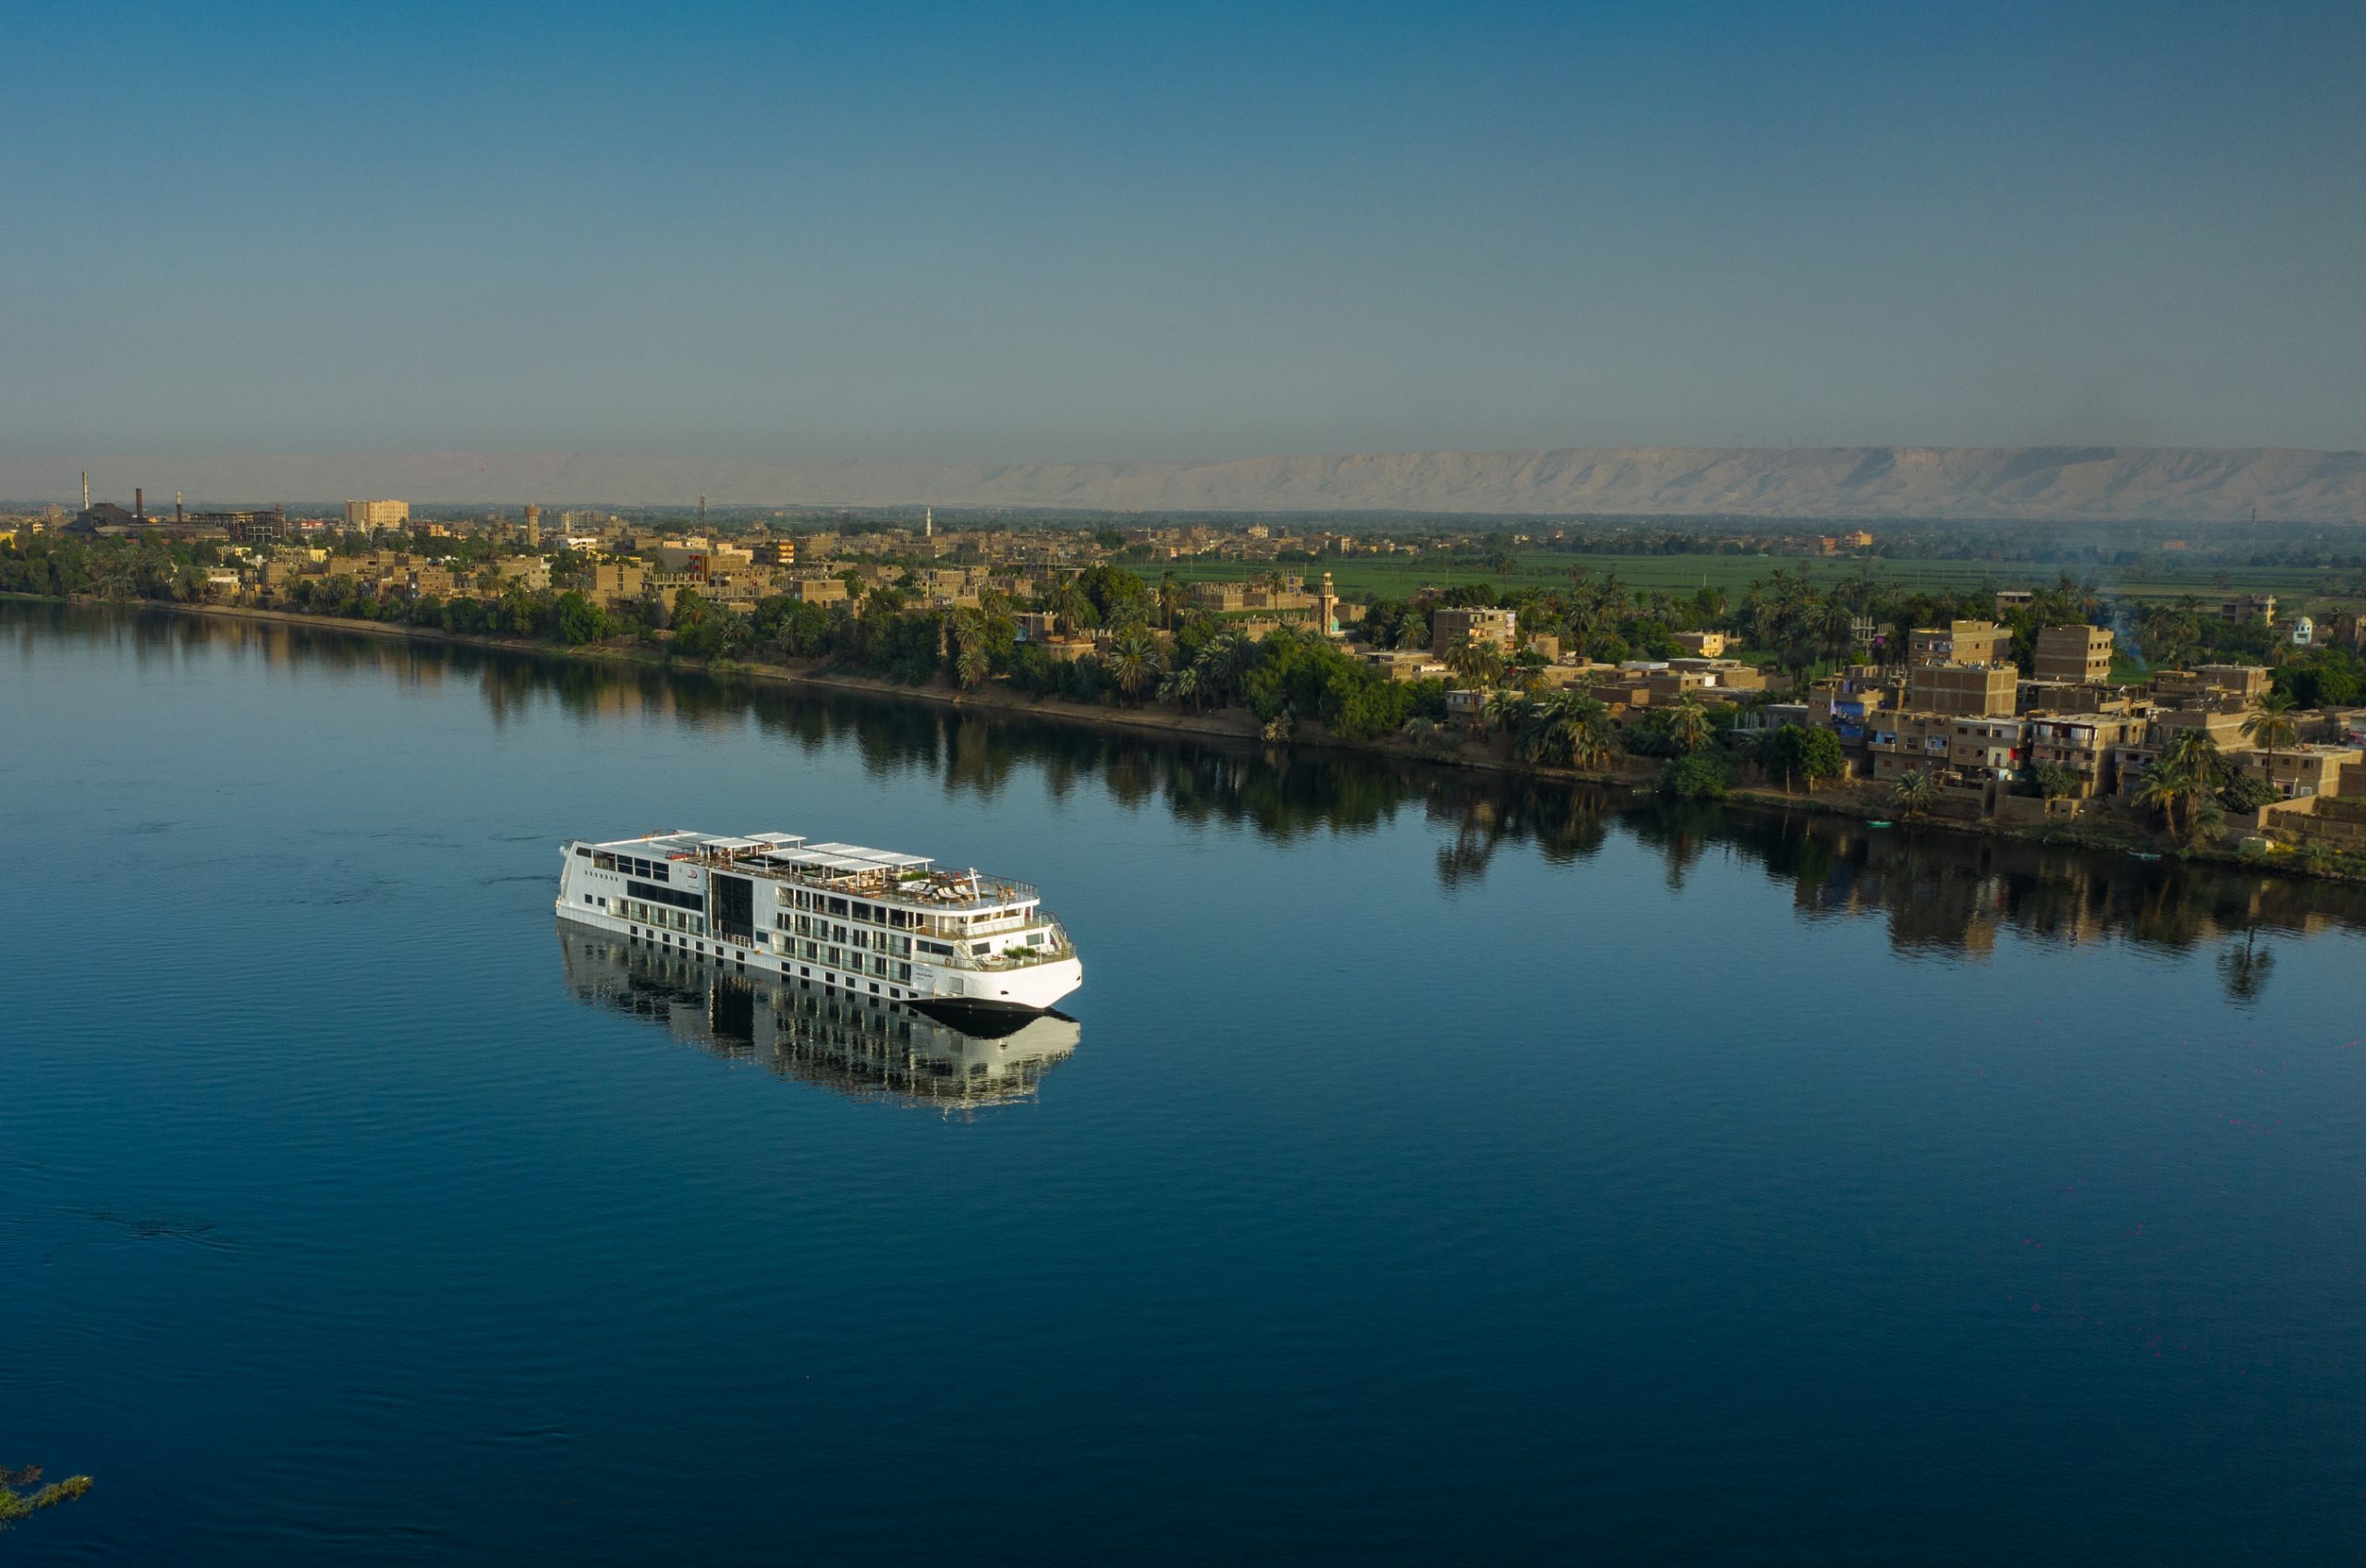 Viking today named its newest river ship, the Viking Osiris, with a celebration in Luxor, Egypt. Designed specifically to navigate the Nile, the state-of-the-art ship was built at Massara shipyard in Cairo and will sail Viking’s bestselling Pharaohs & Pyramids itinerary. For more information, visit www.viking.com.